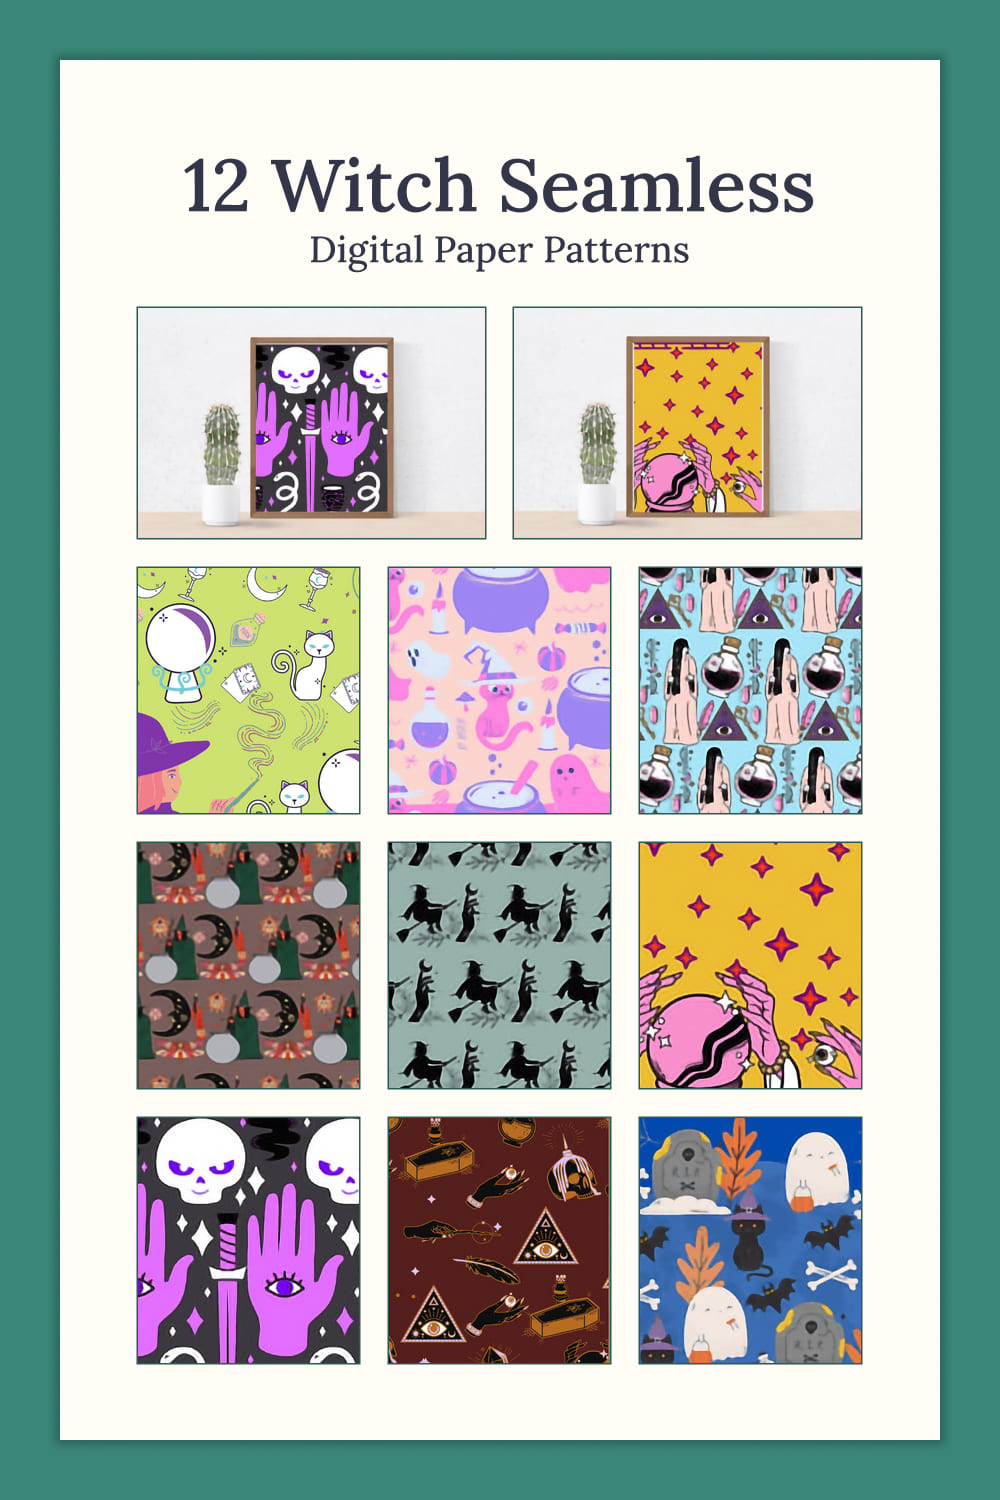 Patterns featuring the moon, skulls, witches, stars, and more.